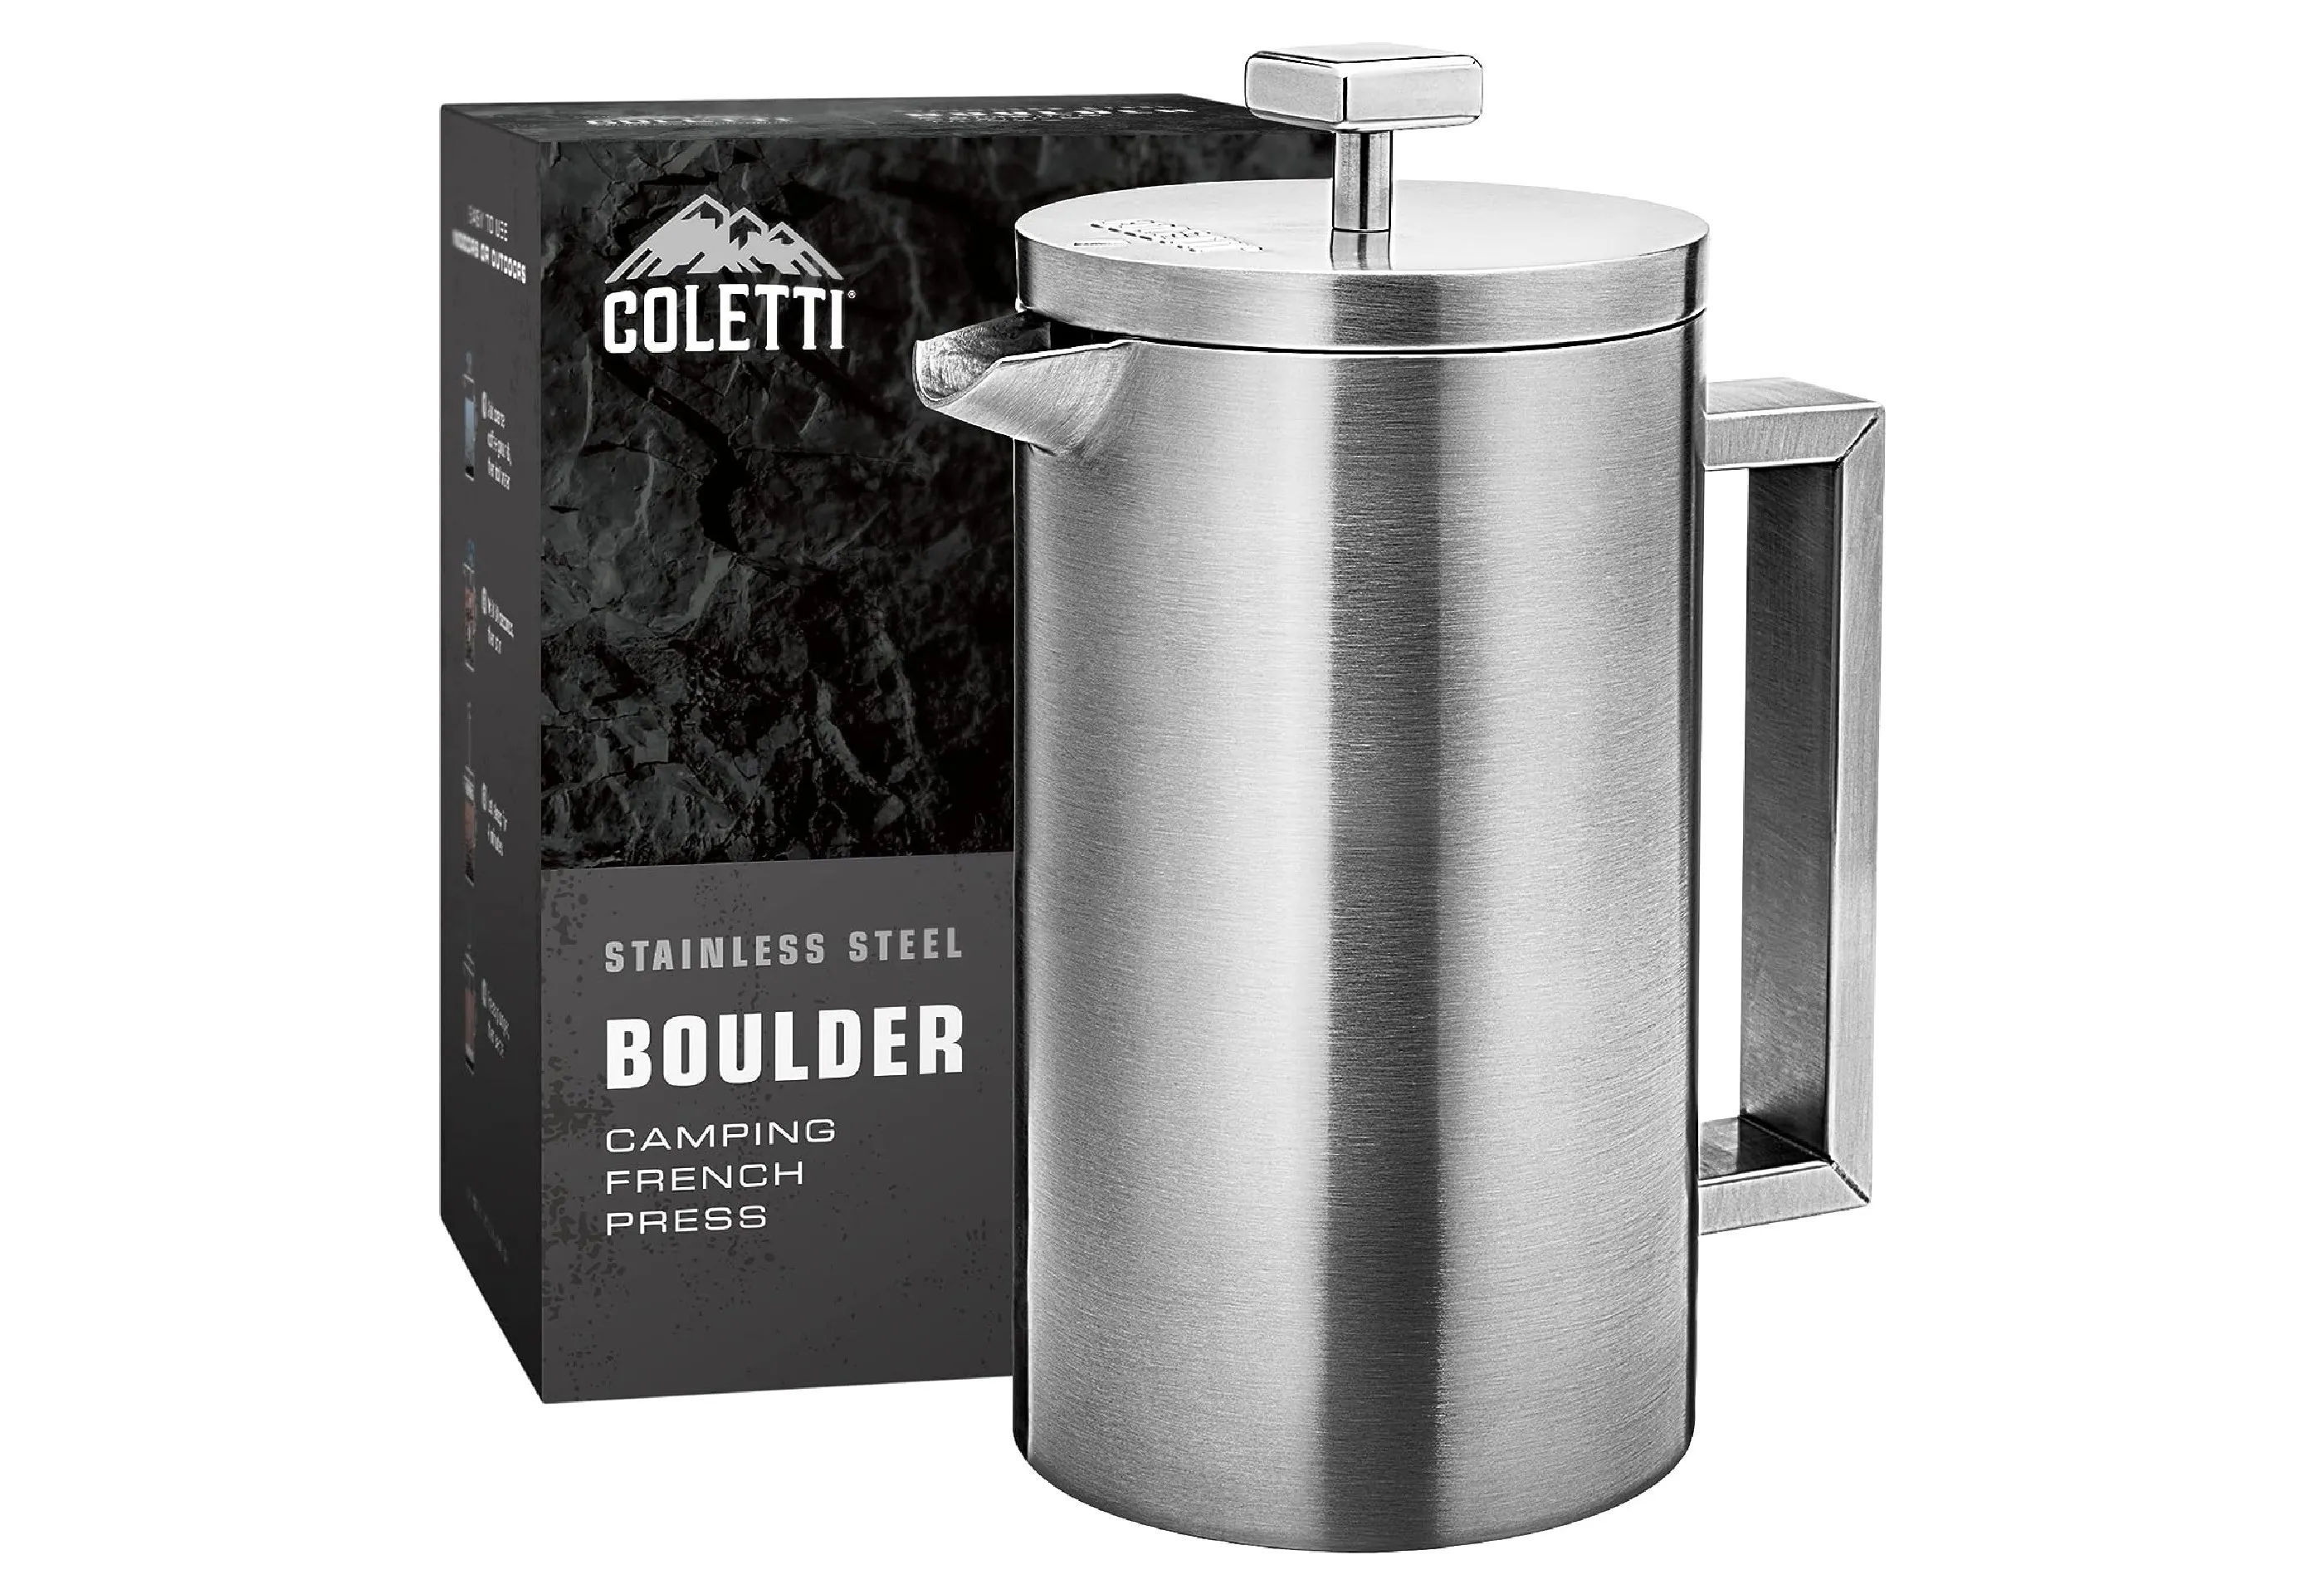 https://img.money.com/2022/12/shopping-coletti-boulder-insulated-camping-french-press.jpg